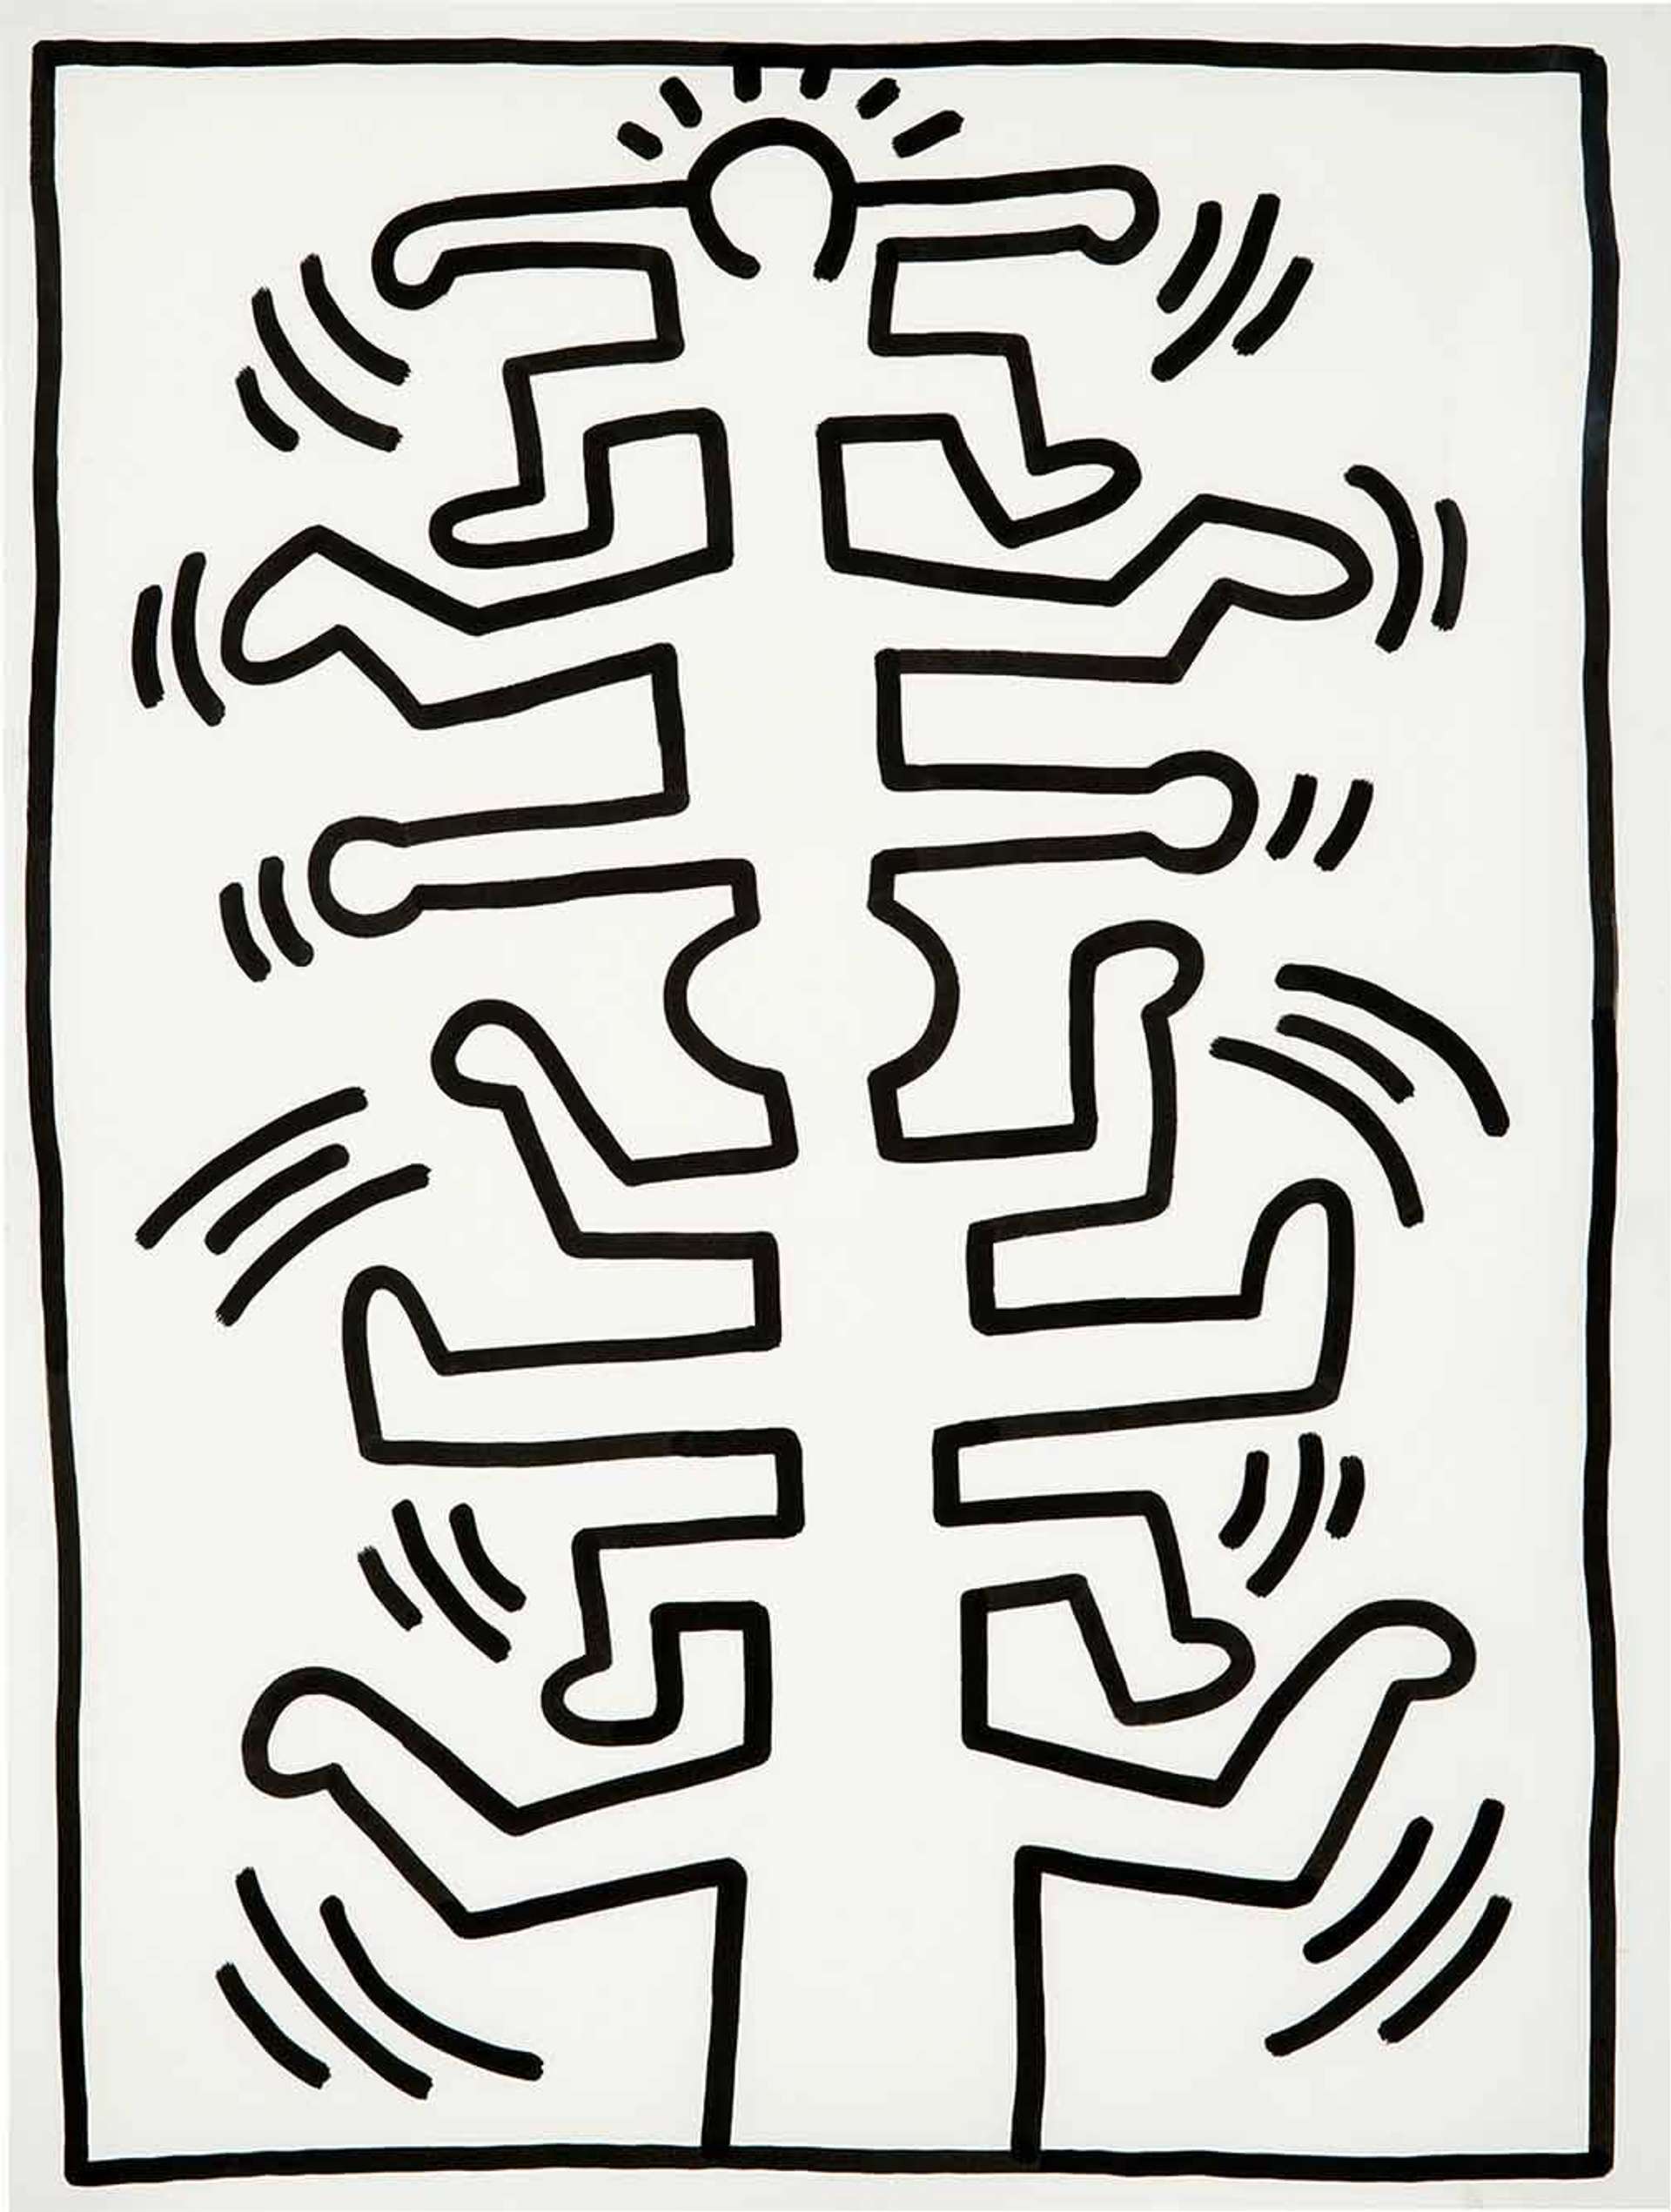 Untitled 1987 - Signed Work on Paper by Keith Haring 1987 - MyArtBroker